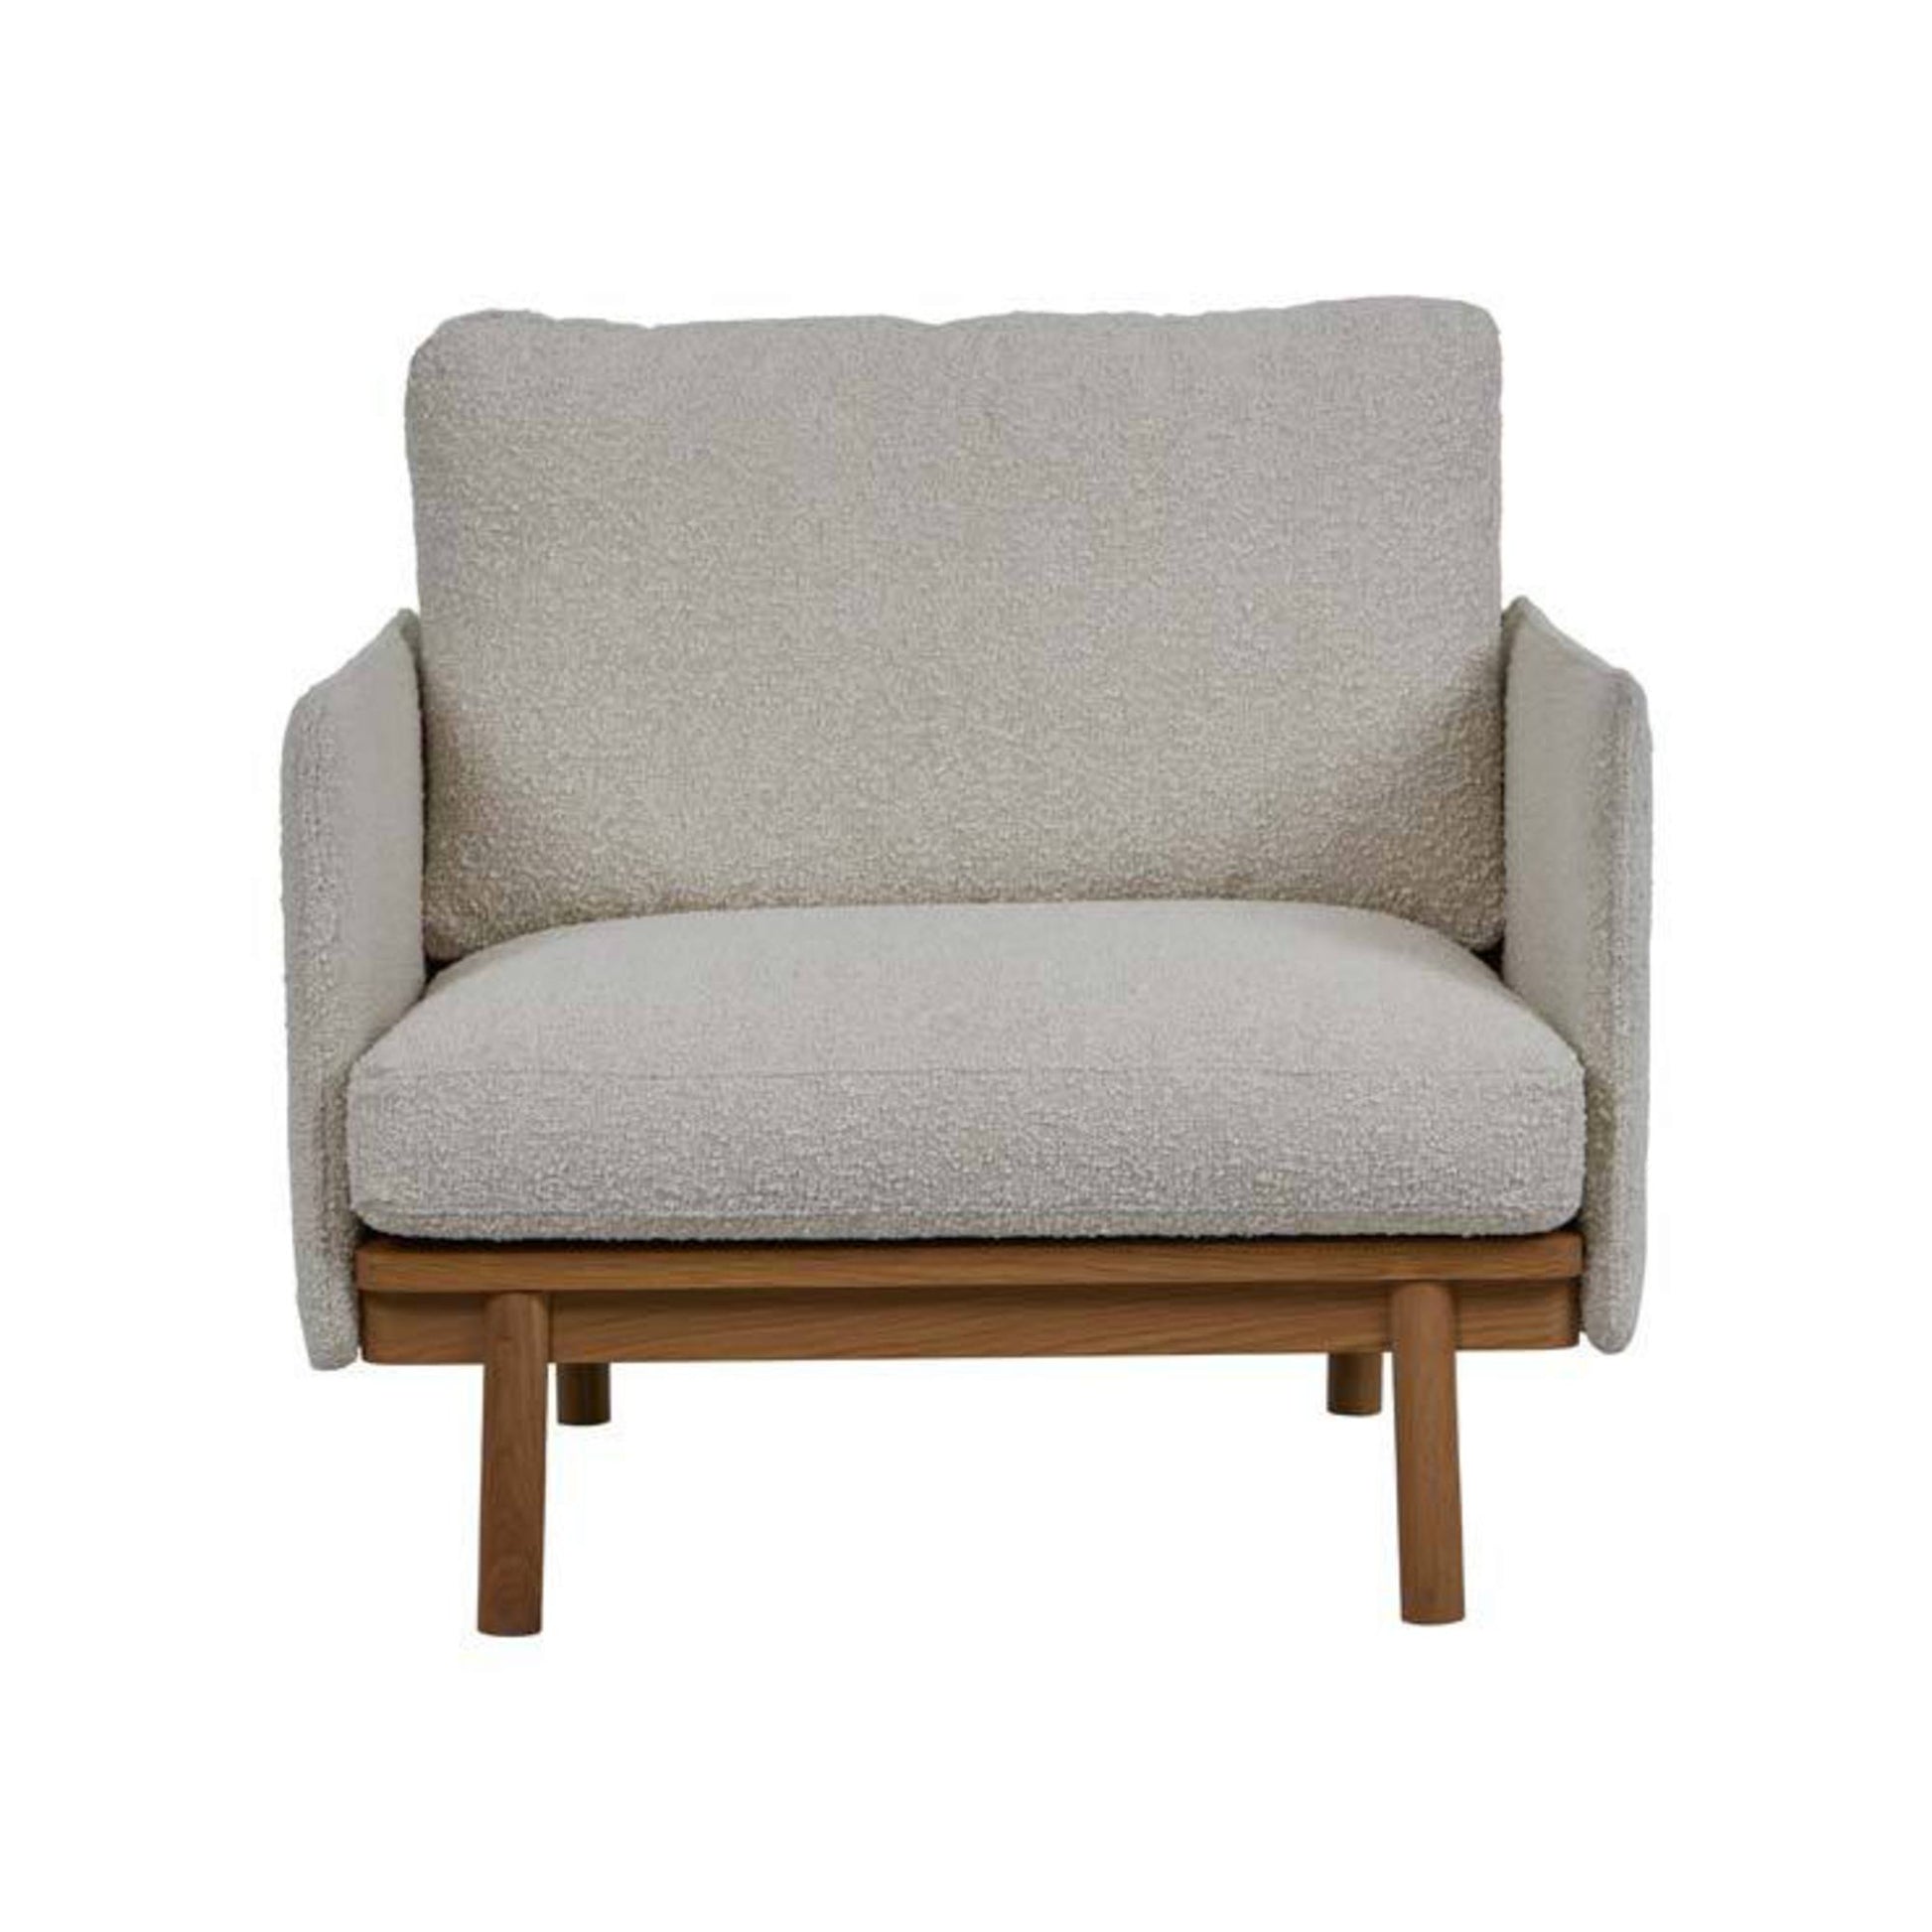 Tolv chair in milk boucle